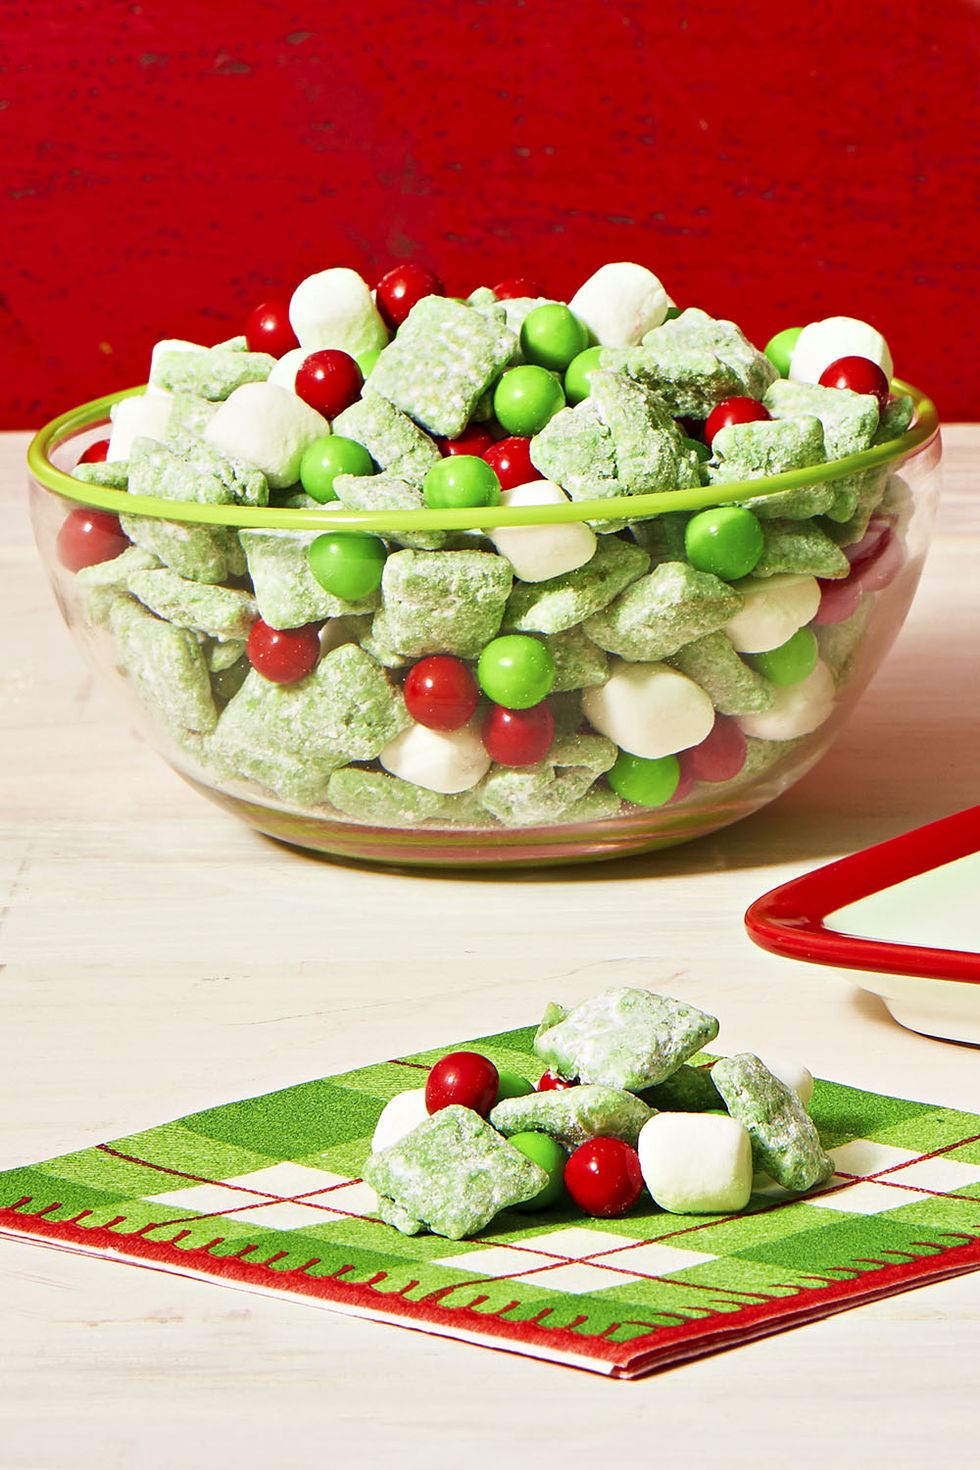 35+ Best Grinch Movie Night Snacks for a Family Party